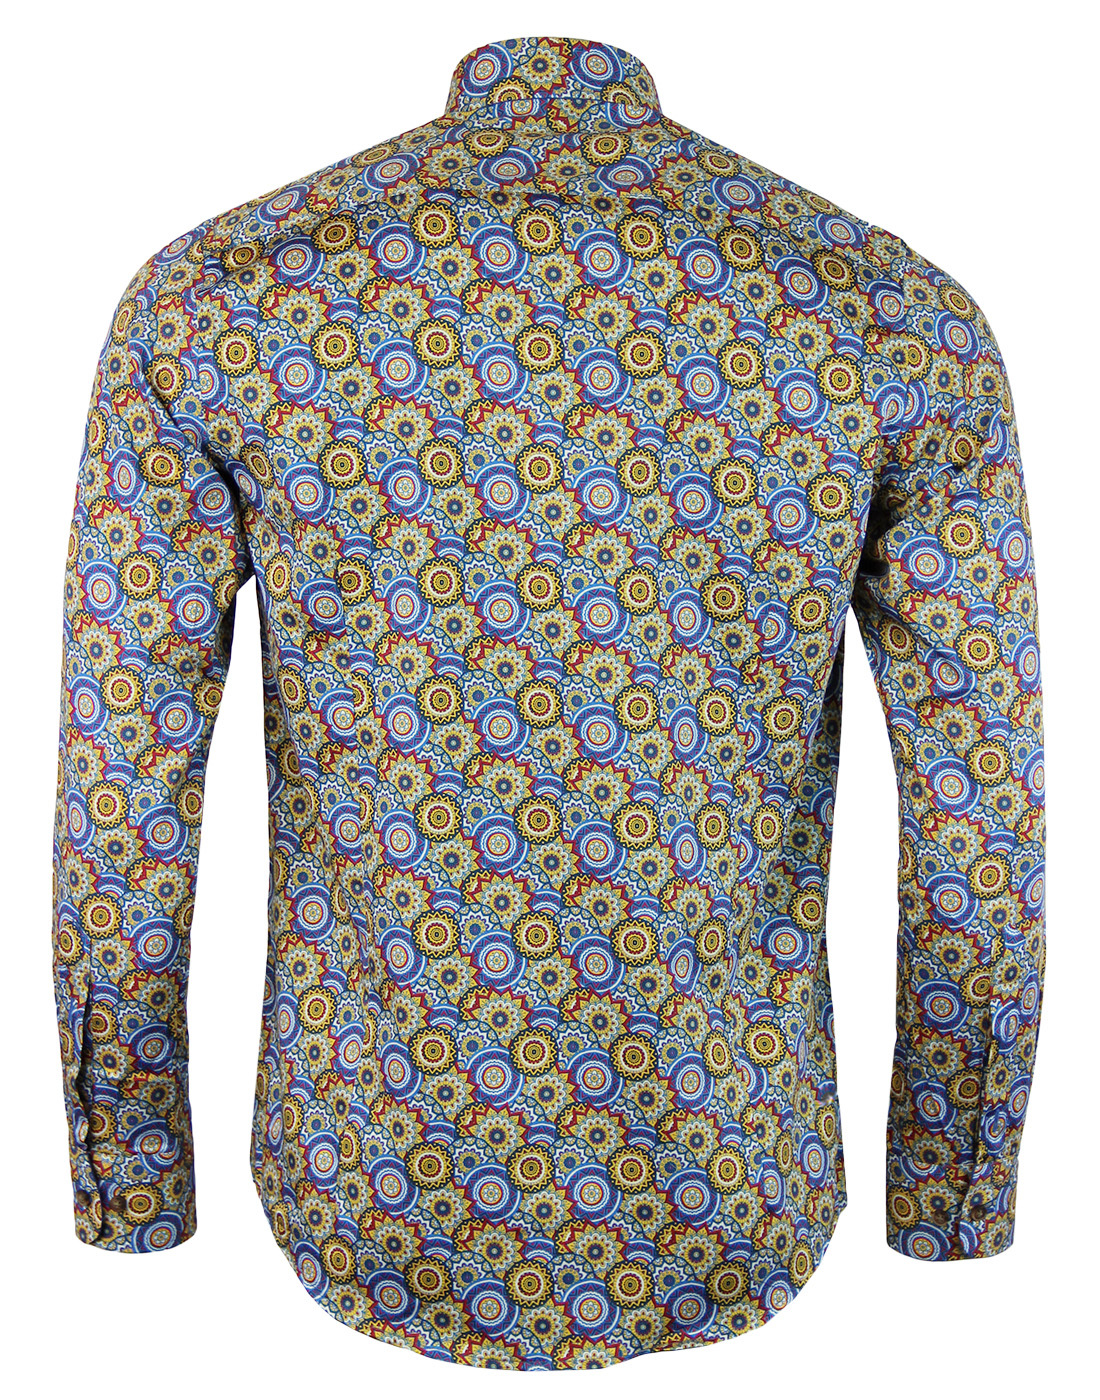 GUIDE LONDON Men's Retro 60s Mod Psychedelic Floral Circle Shirt